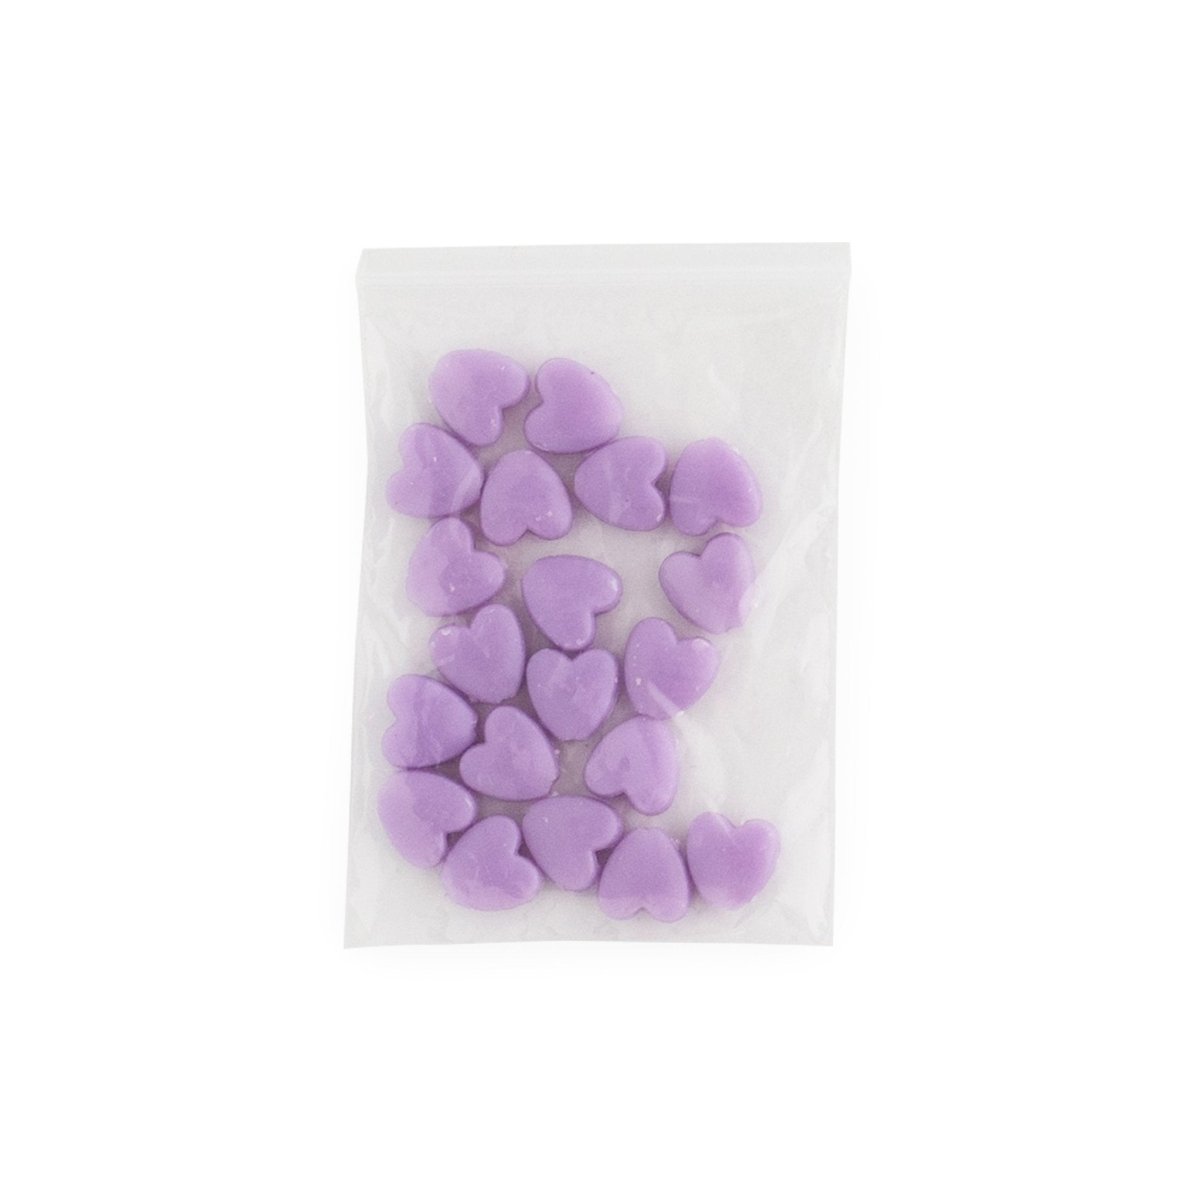 Accent Beads Hearts Mini Light Purple from Cara & Co Craft Supply